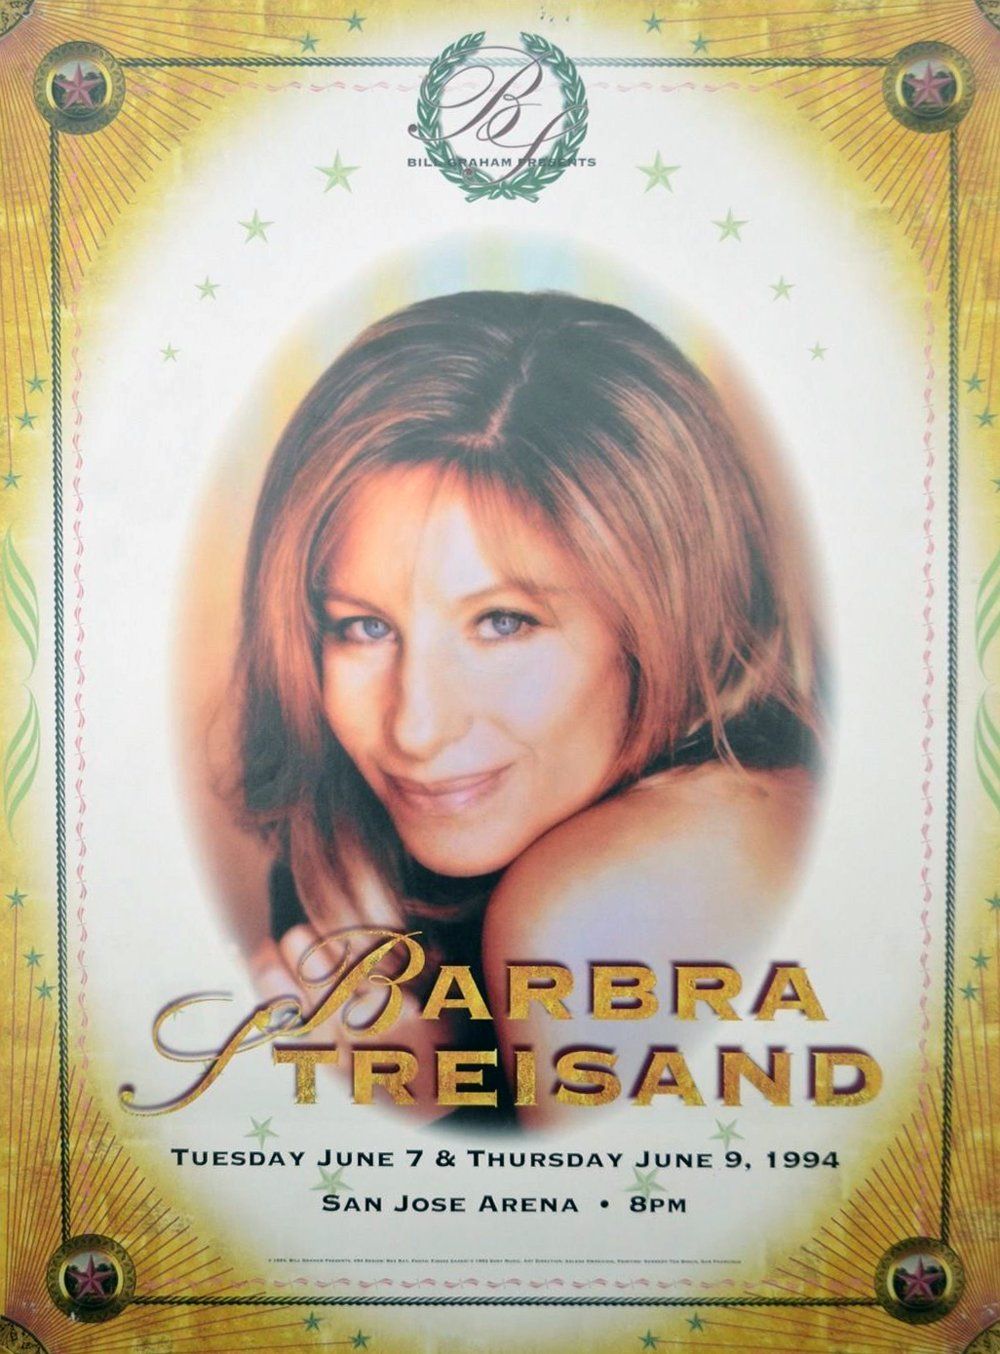 Ad for Streisand's San Jose concerts